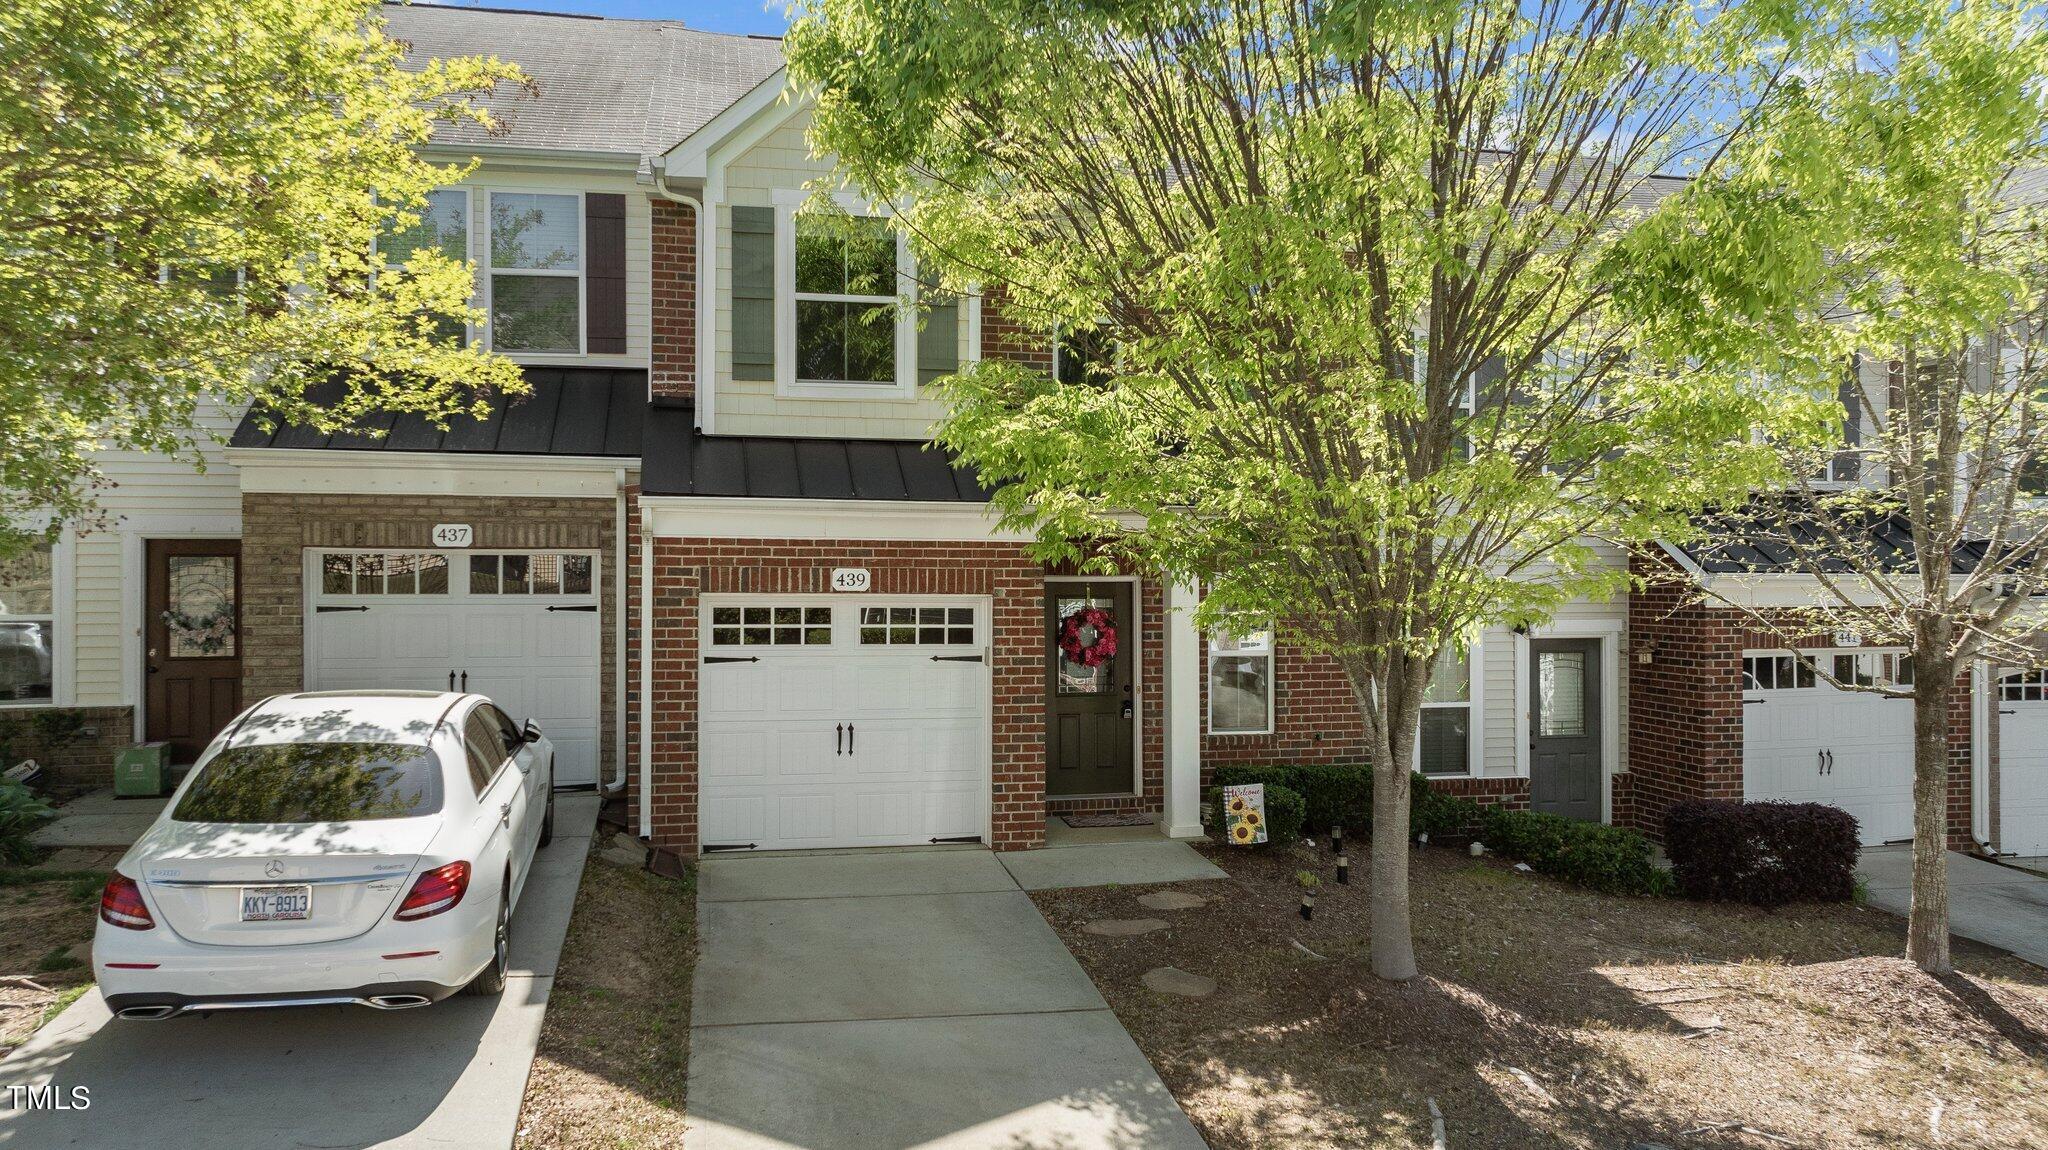 Photo one of 439 Panorama View Loop Cary NC 27519 | MLS 10023610